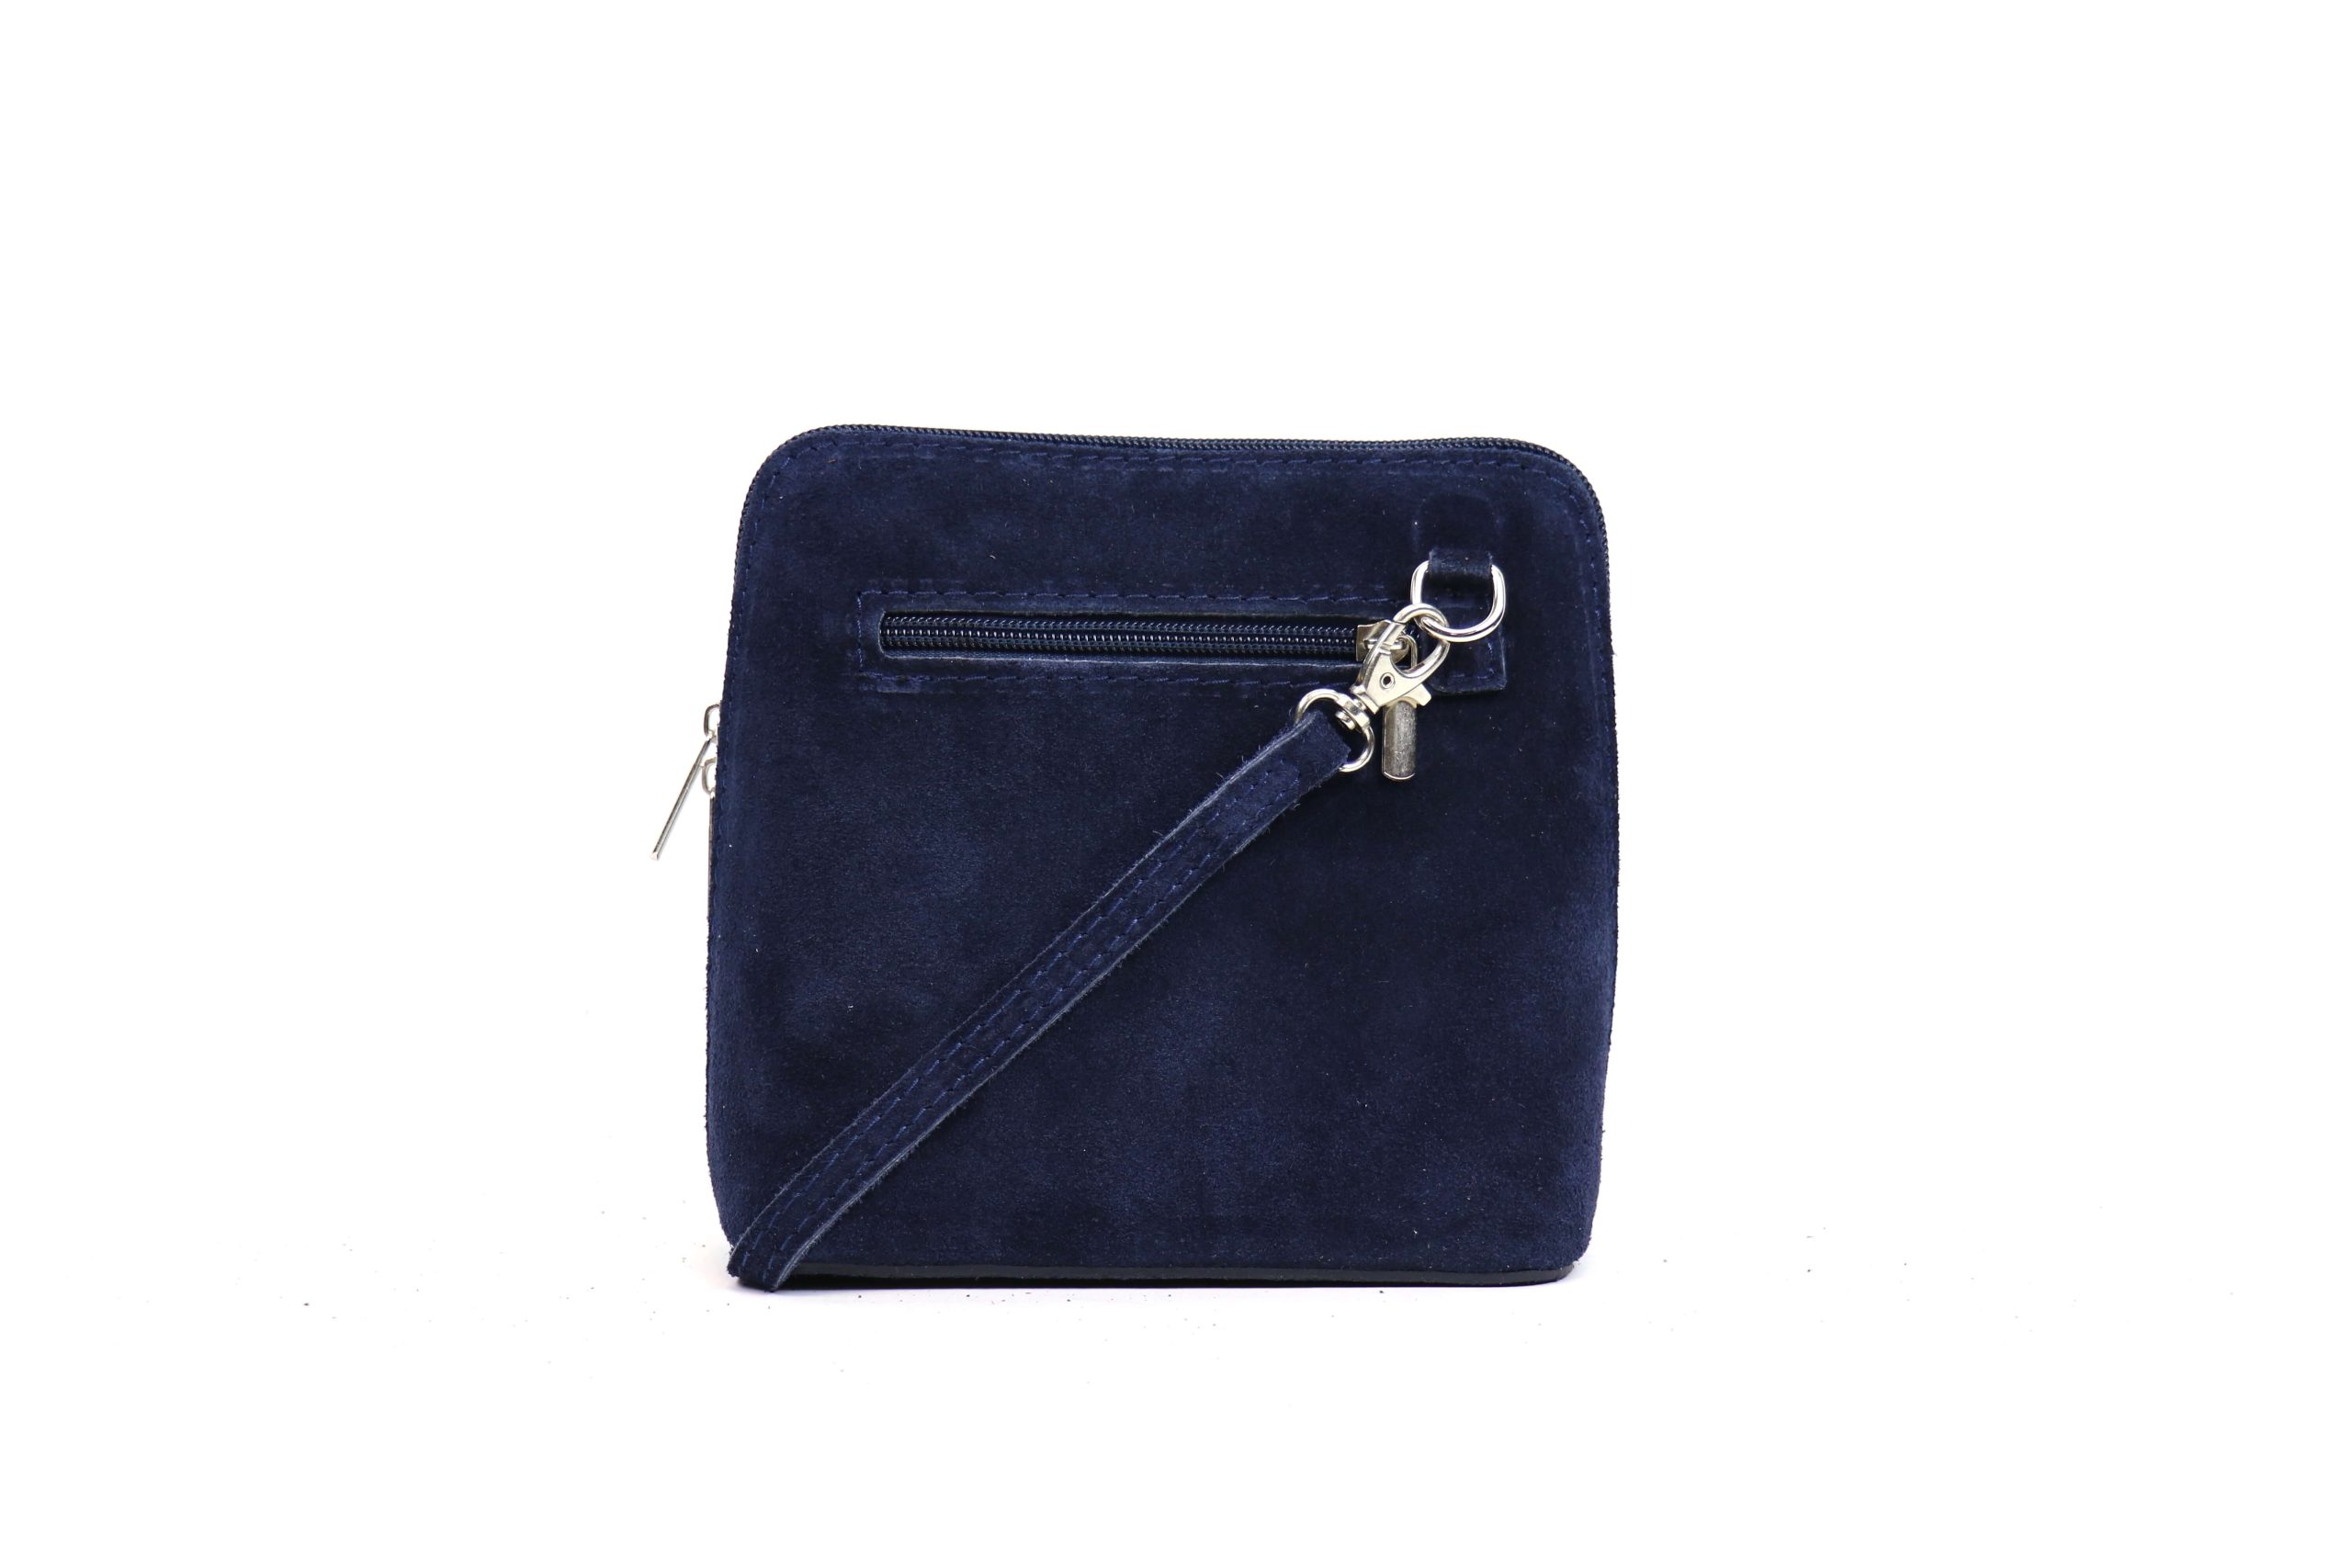 Personalised Suede Clutch Bag By Posh Totty Designs Creates |  notonthehighstreet.com